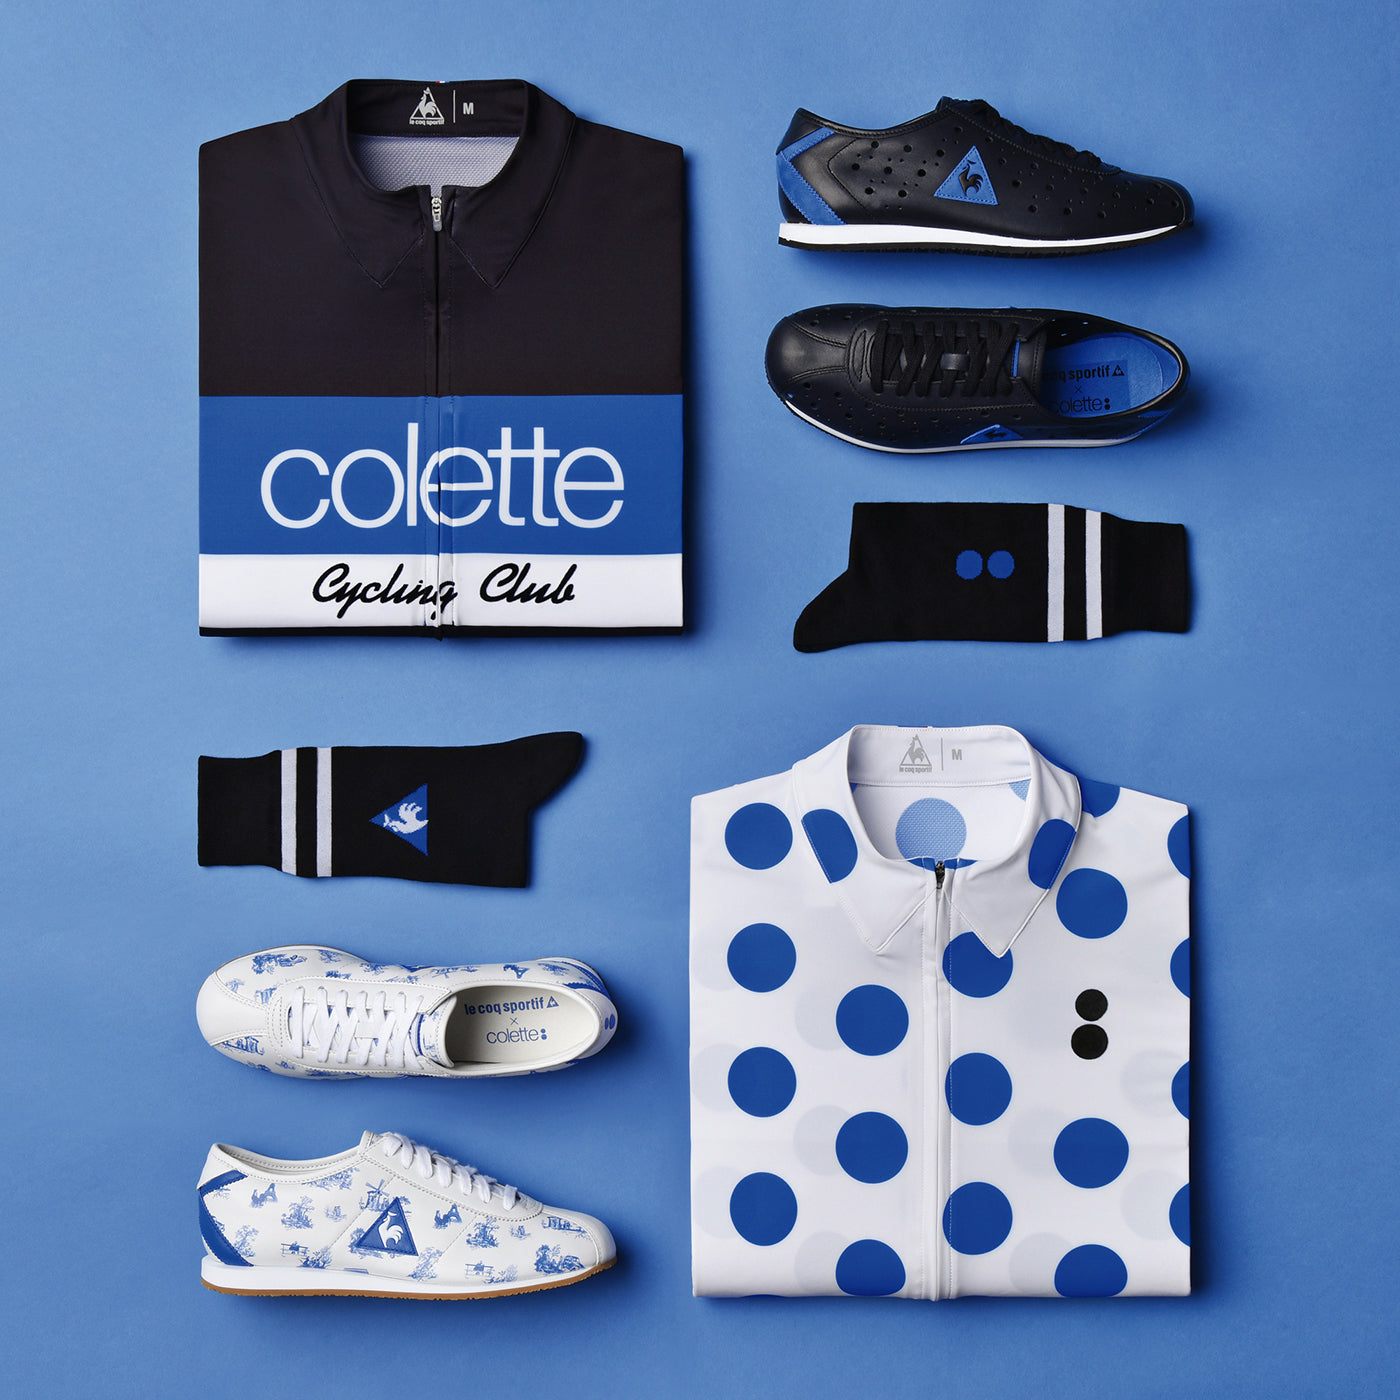 Products from the brand collaboration of Coq Sportif and colette. (Photo: Thomas Welch)